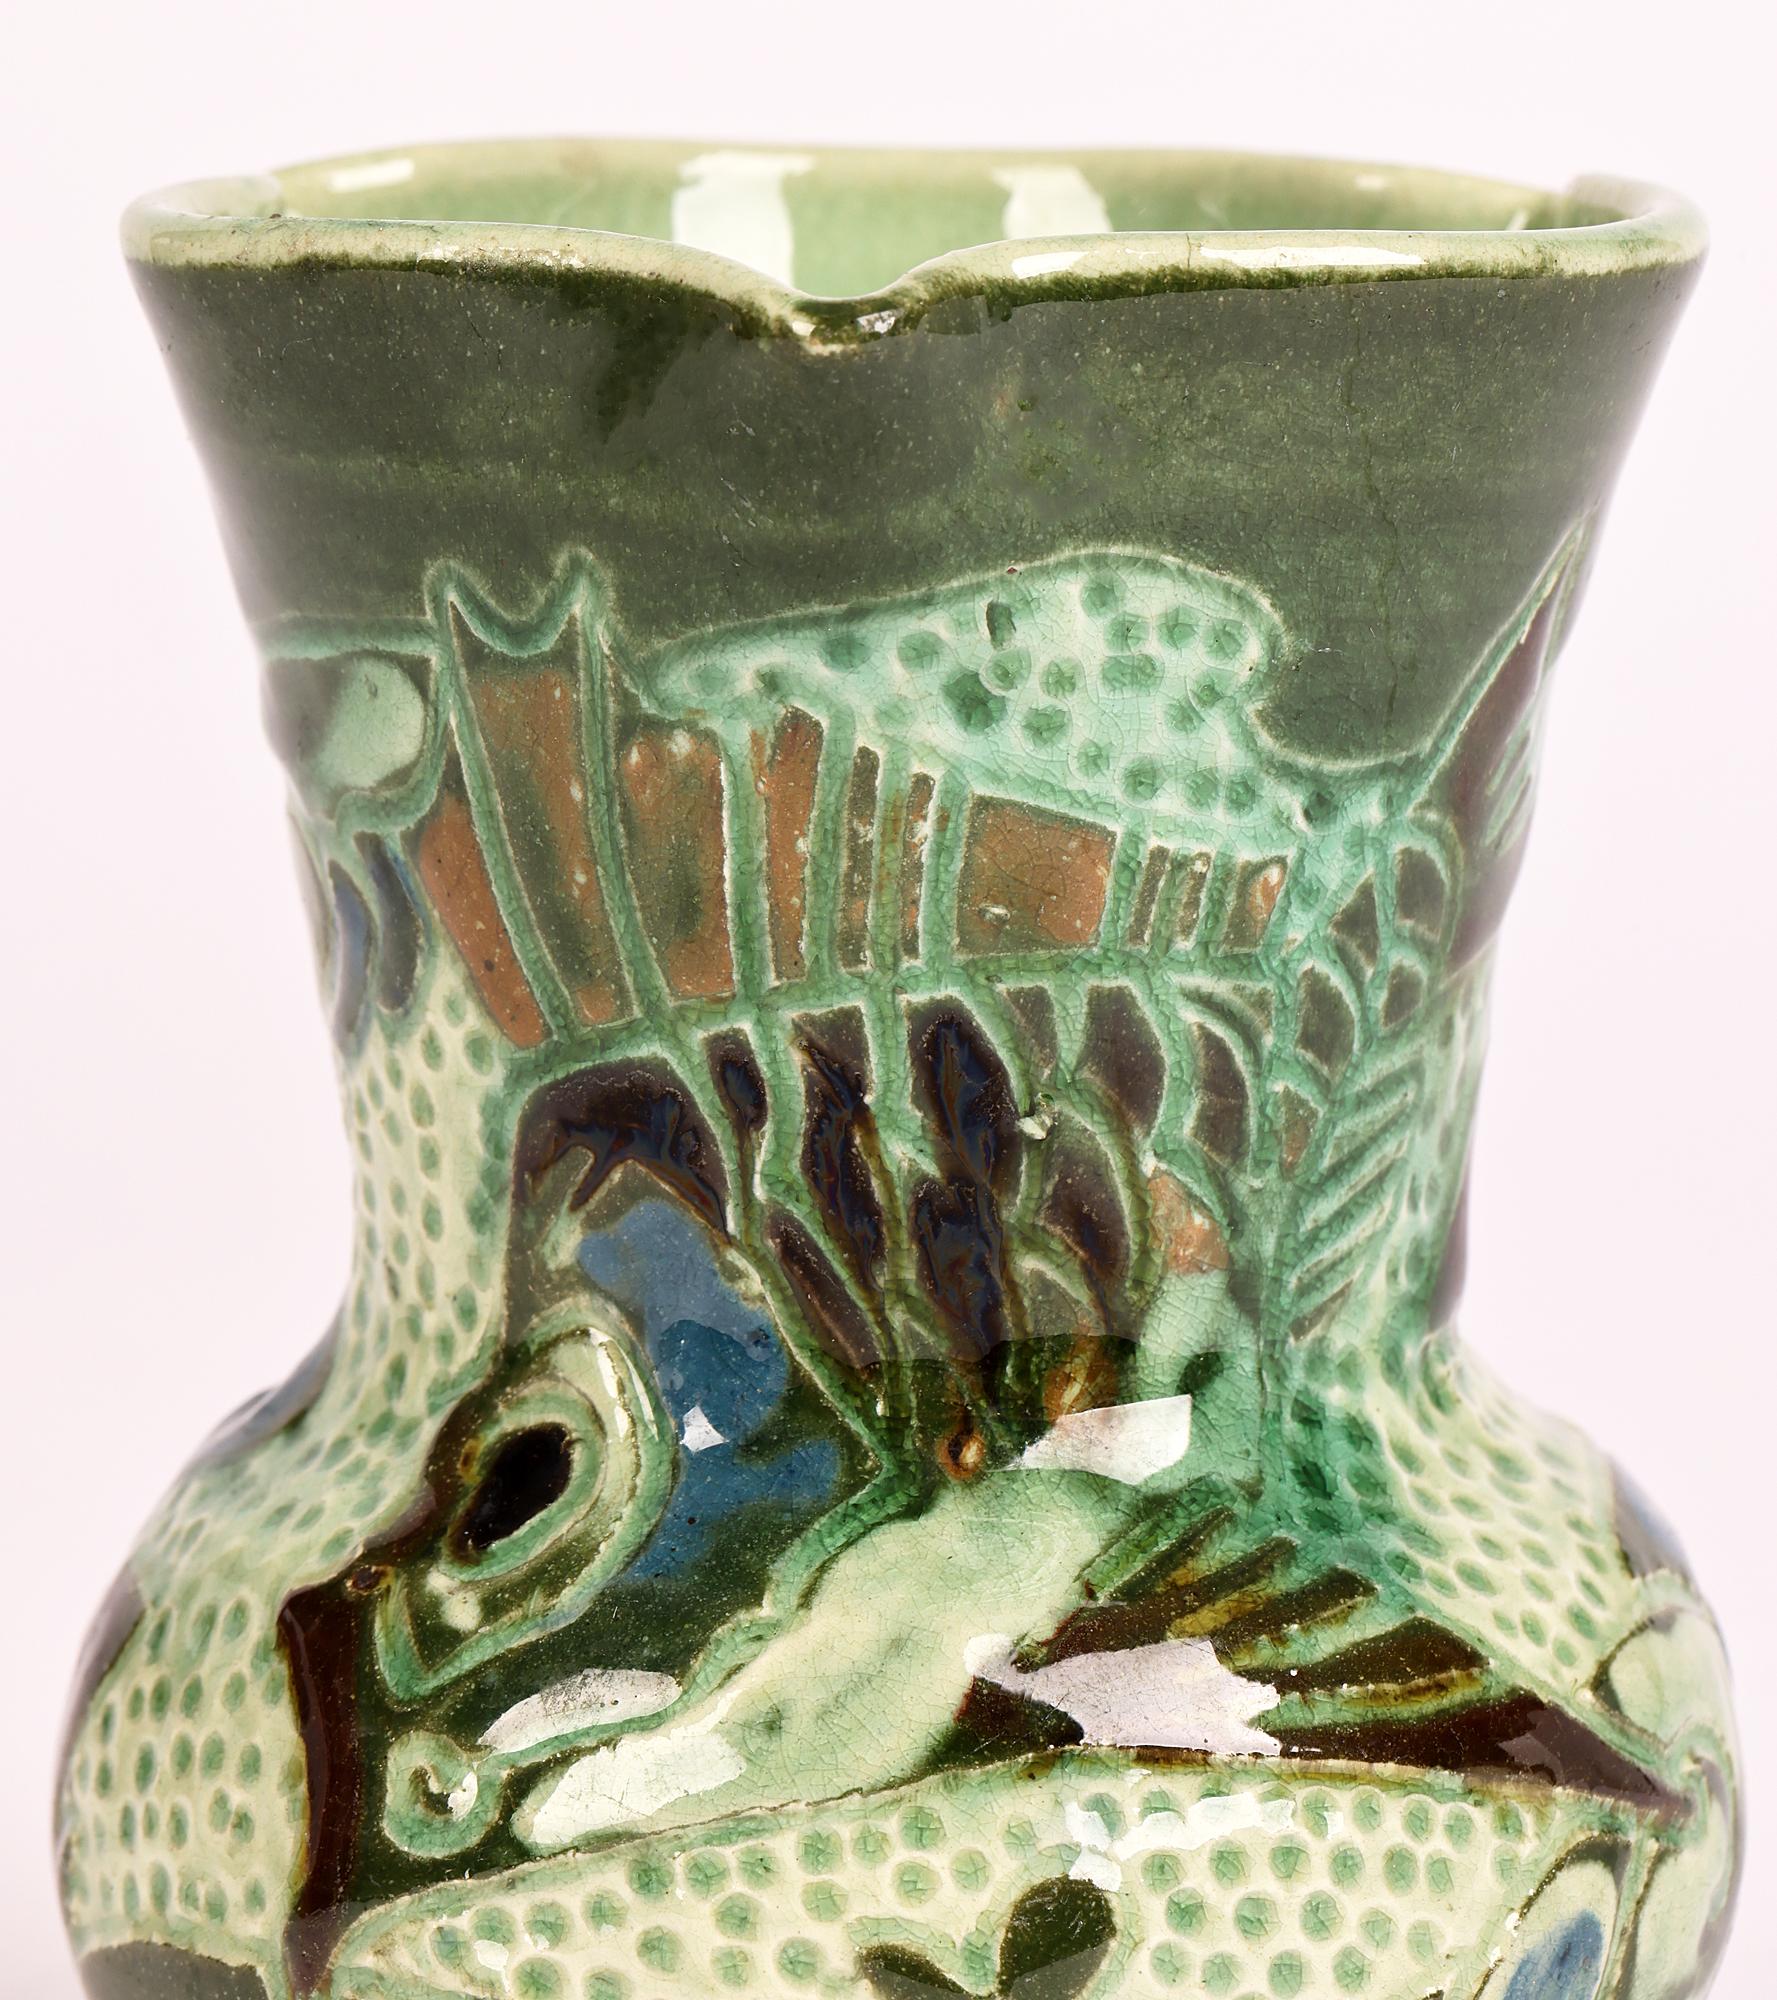 A delightful Devon art pottery vase decorated in sgraffito with a fish swimming amidst weed made in Barnstaple by renowned artist William Leonard Baron (British, 1863-1937) dating from around 1895. 

William Baron studied at Lambeth School of Art